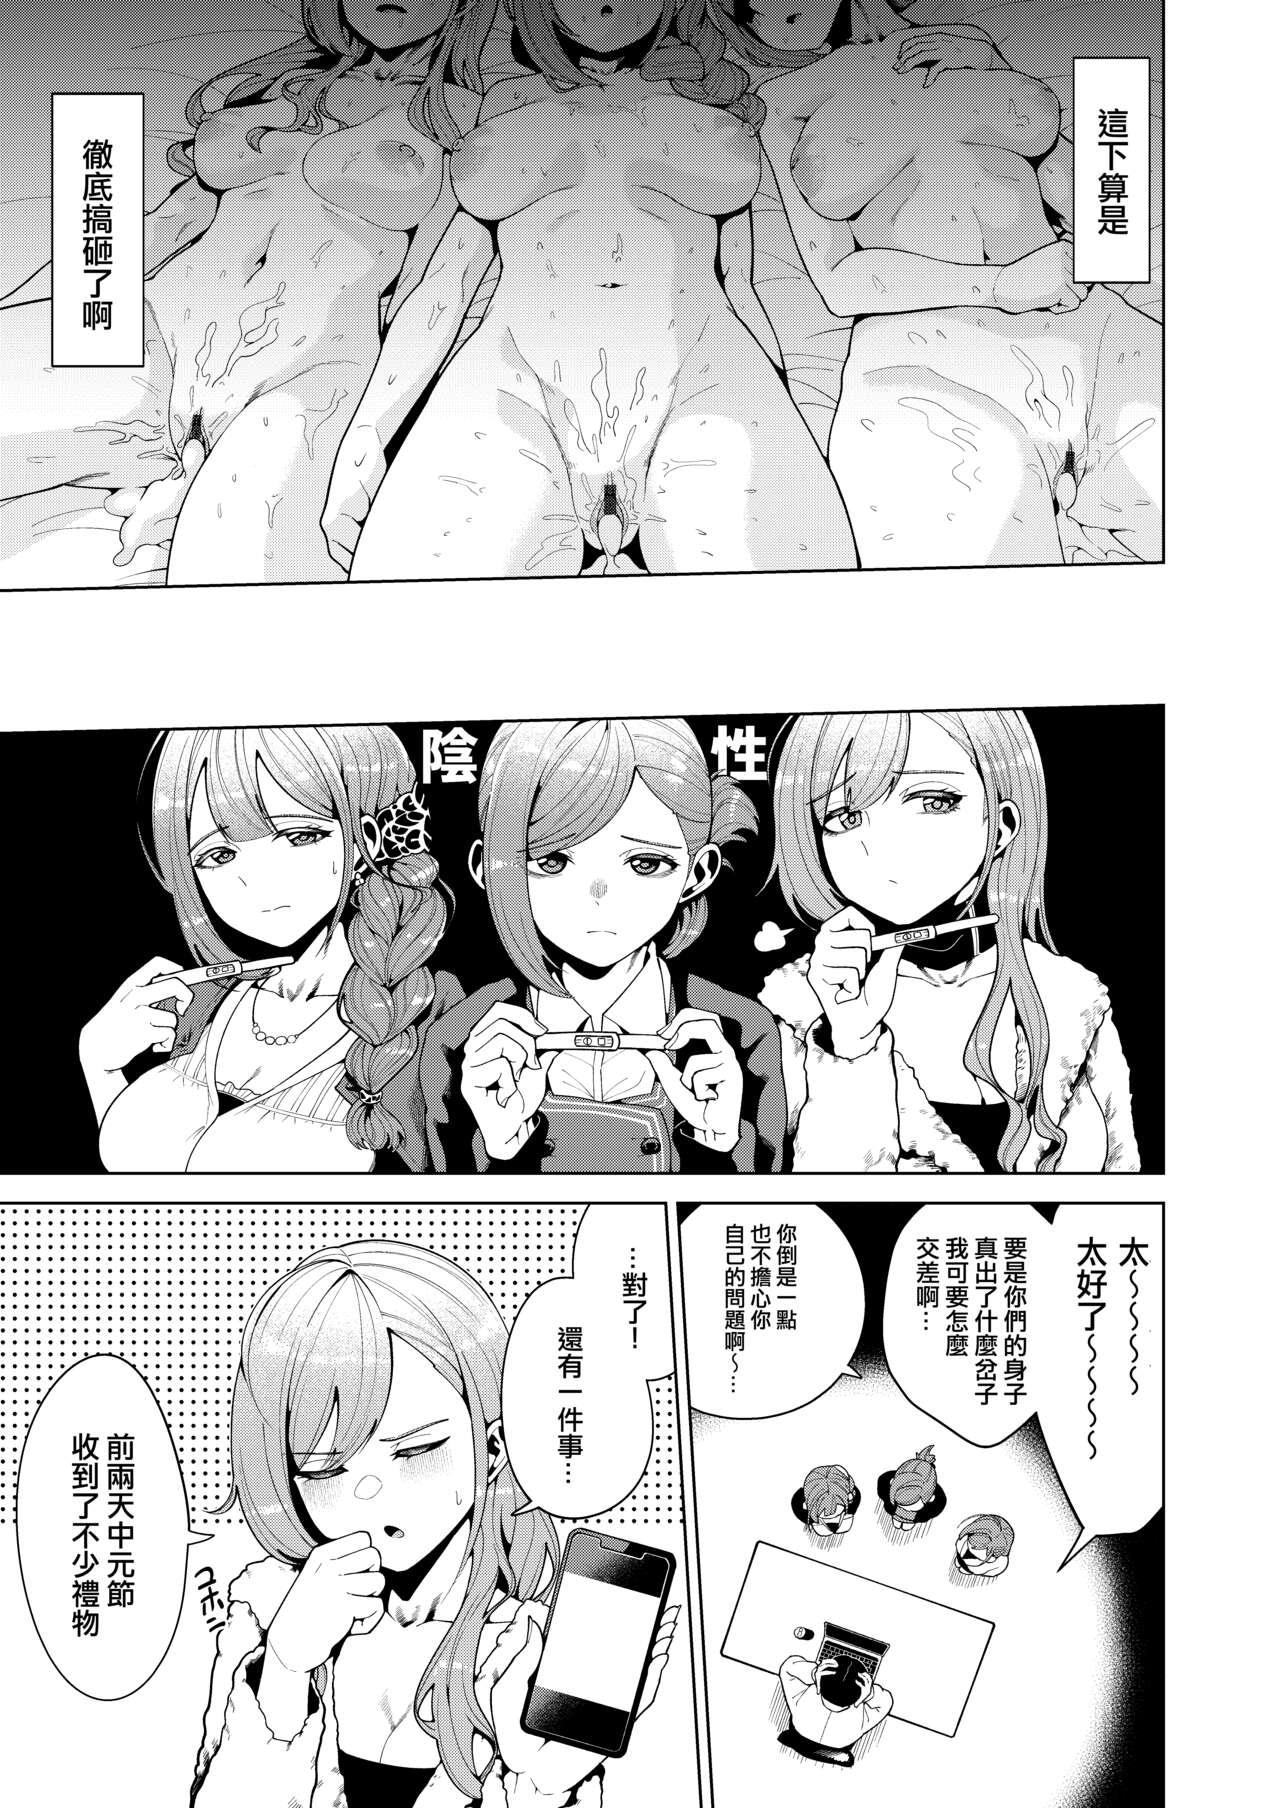 Cosplay Golden Harvest - The idolmaster Black Dick - Page 20